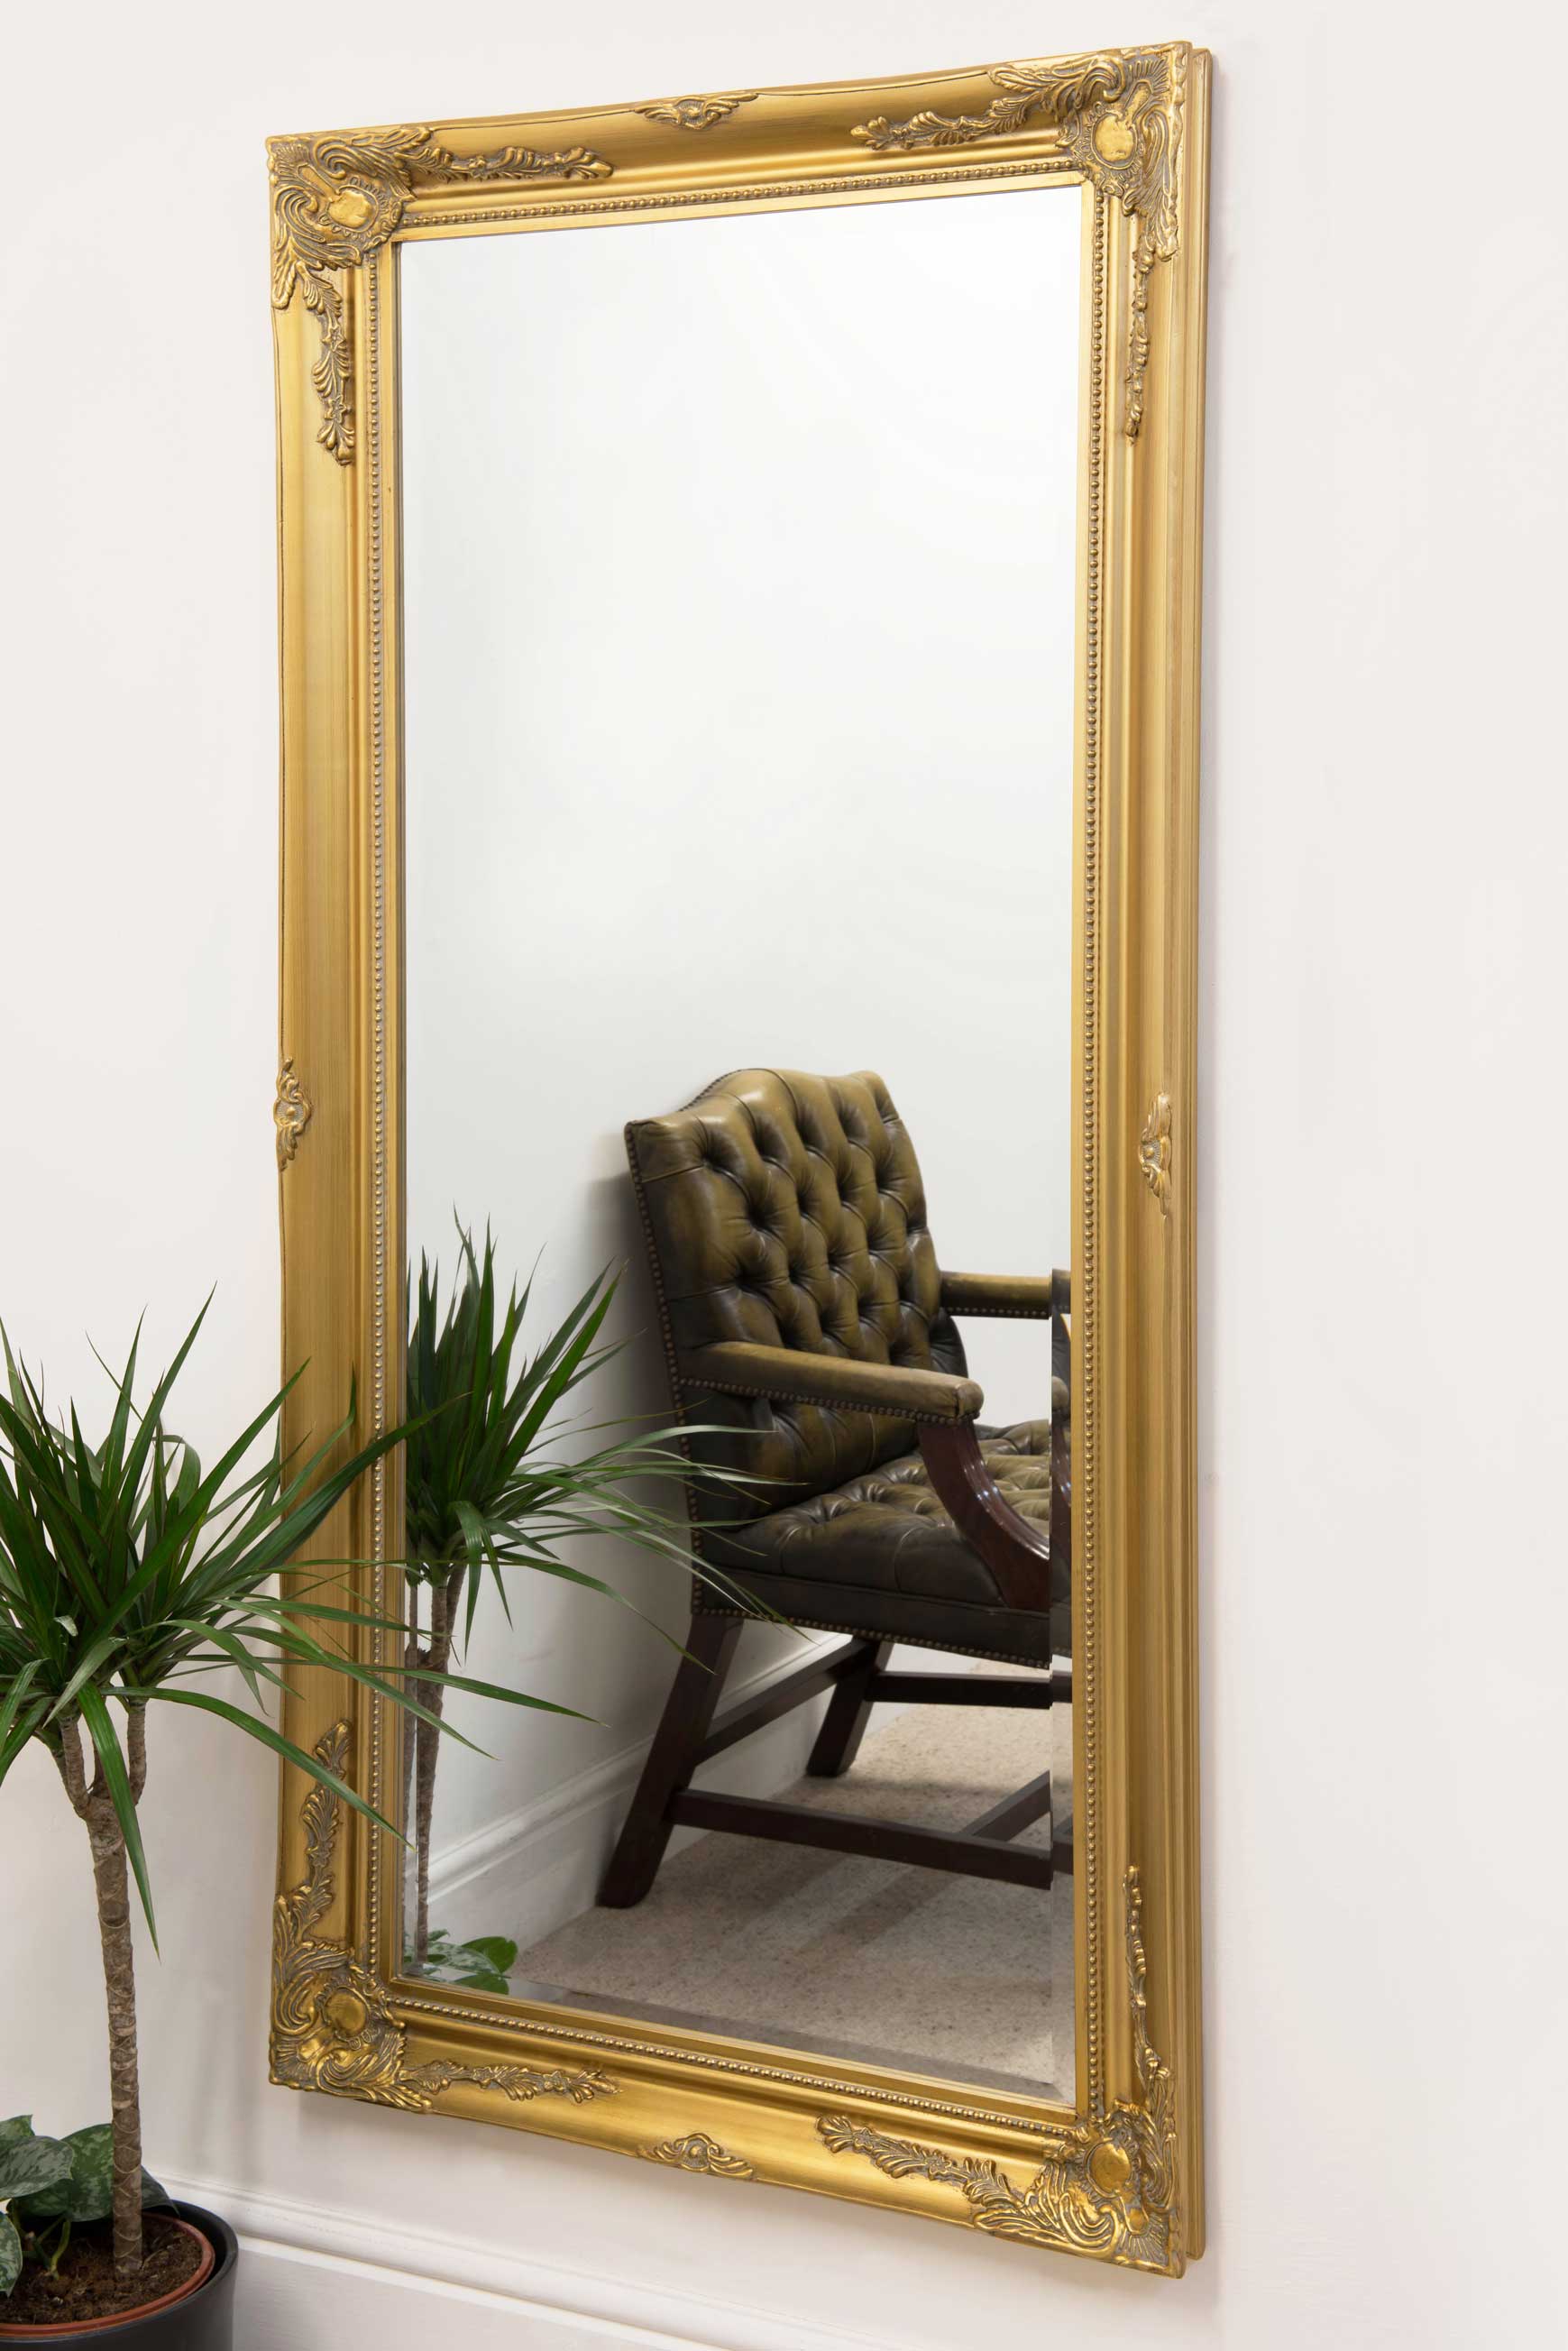 Extra Large Full Length Classic Ornate Styled Gold Mirror 5Ft7 X 2Ft7